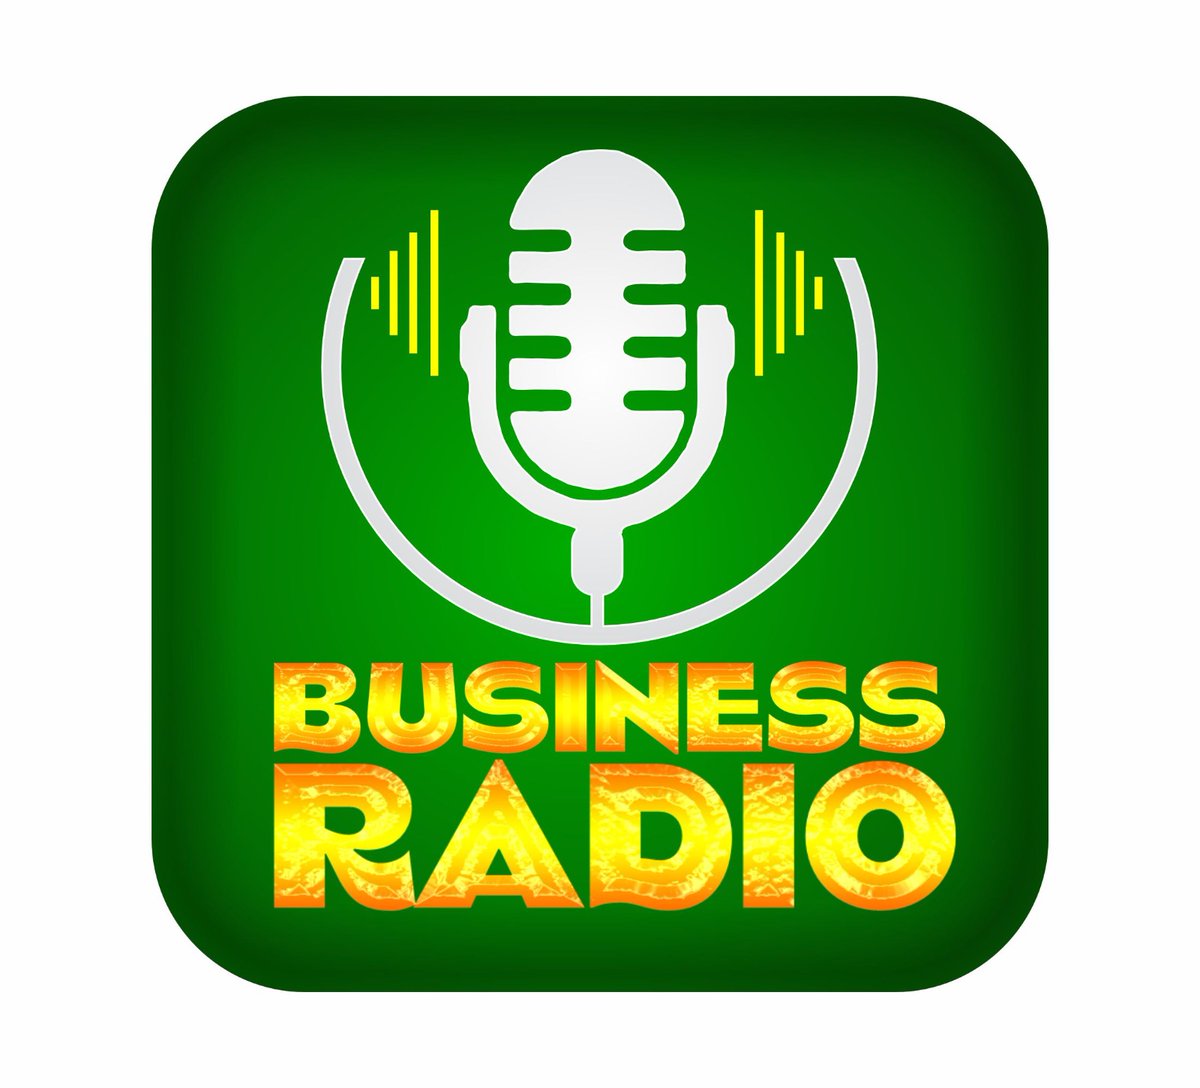 Join me LIVE on Business Radio on Eko 89.7FM at 10:30am - 11am prompt this morning. #MCJohn #OAP #VoiceOverArtist #BusinessRadio #VokalMedia